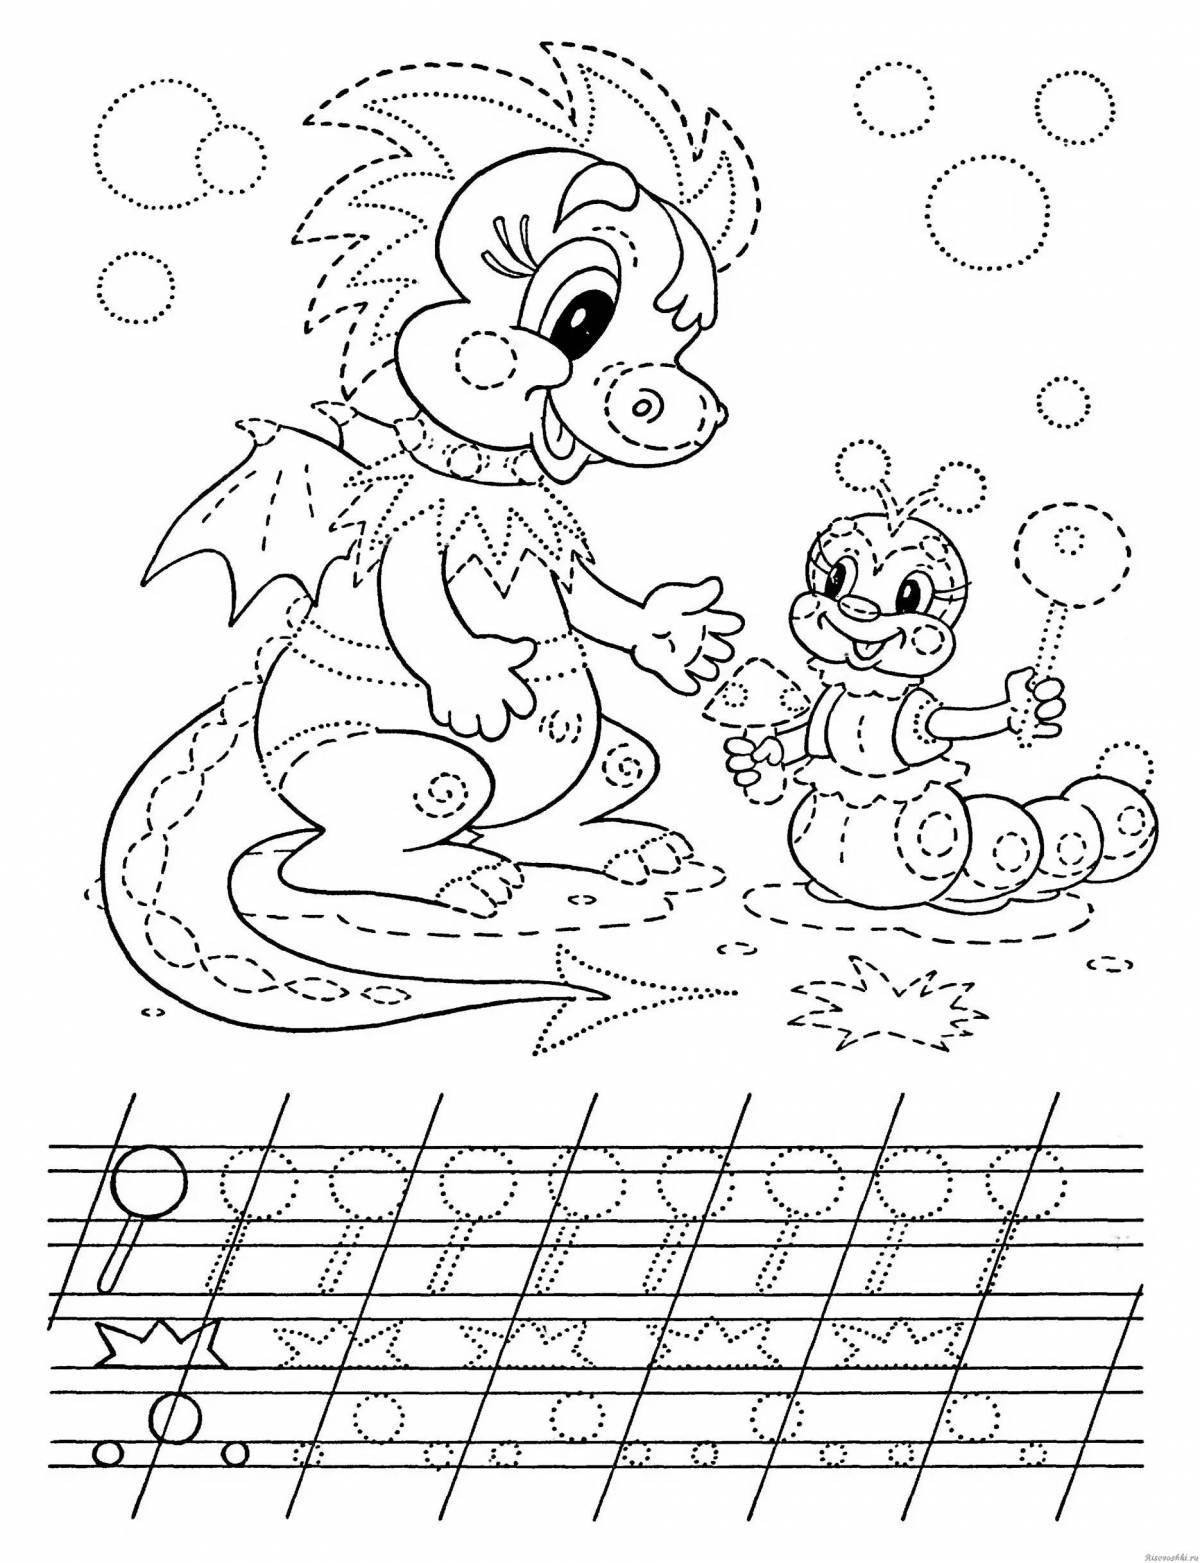 Inspirational coloring pages for girls educational